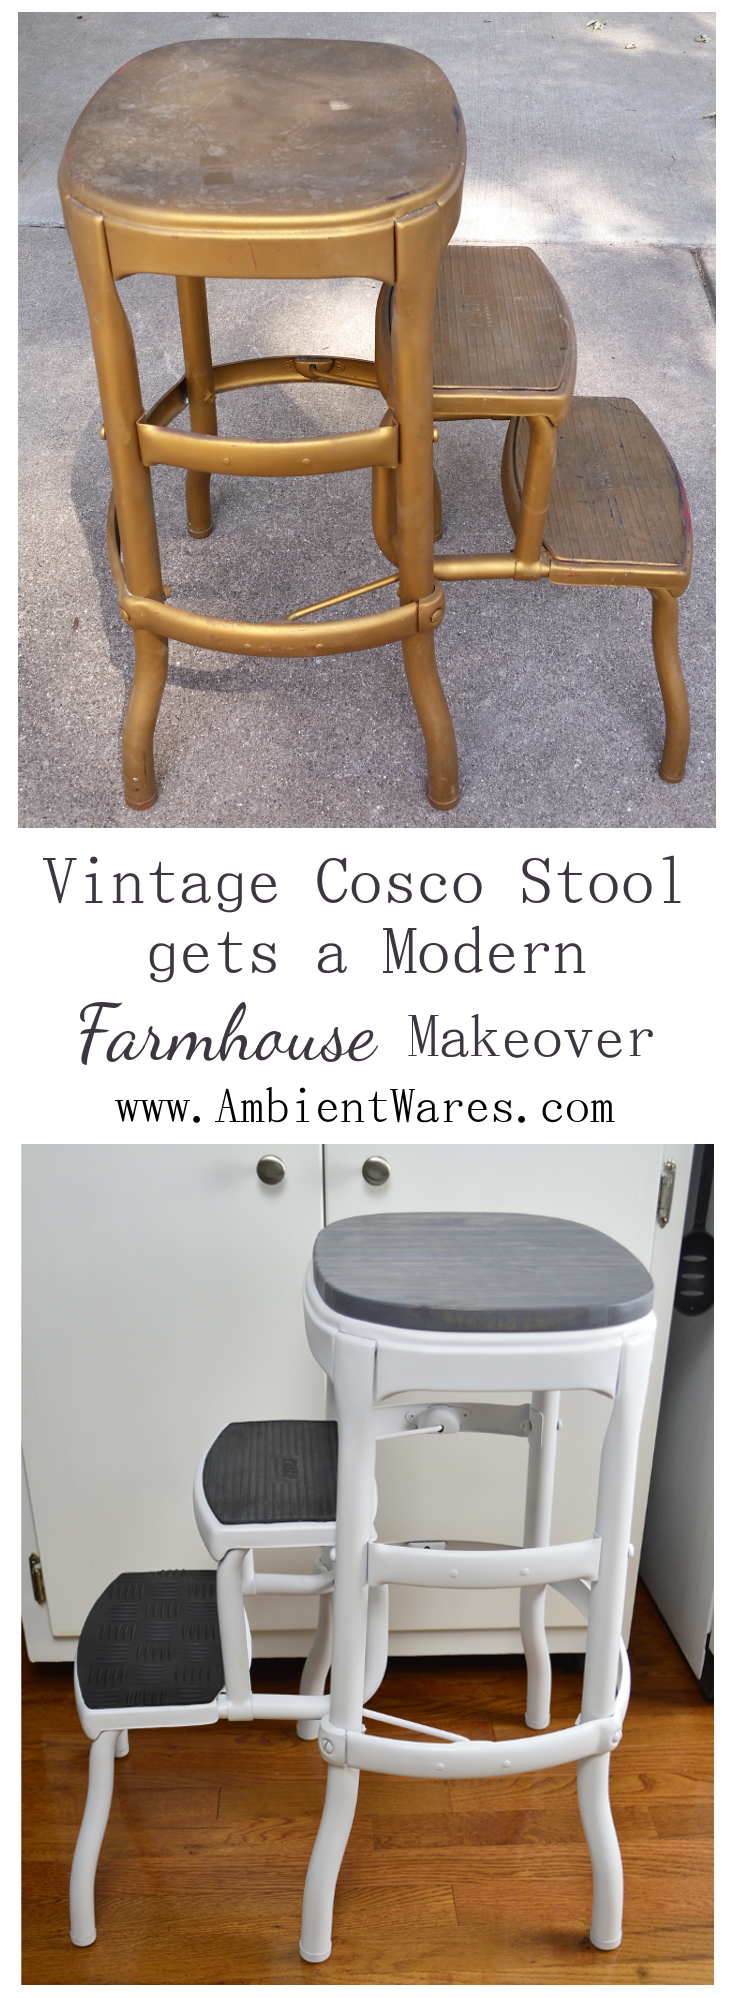 Vintage Cosco Step Stool gets a Modern Farmhouse Styled Makeover